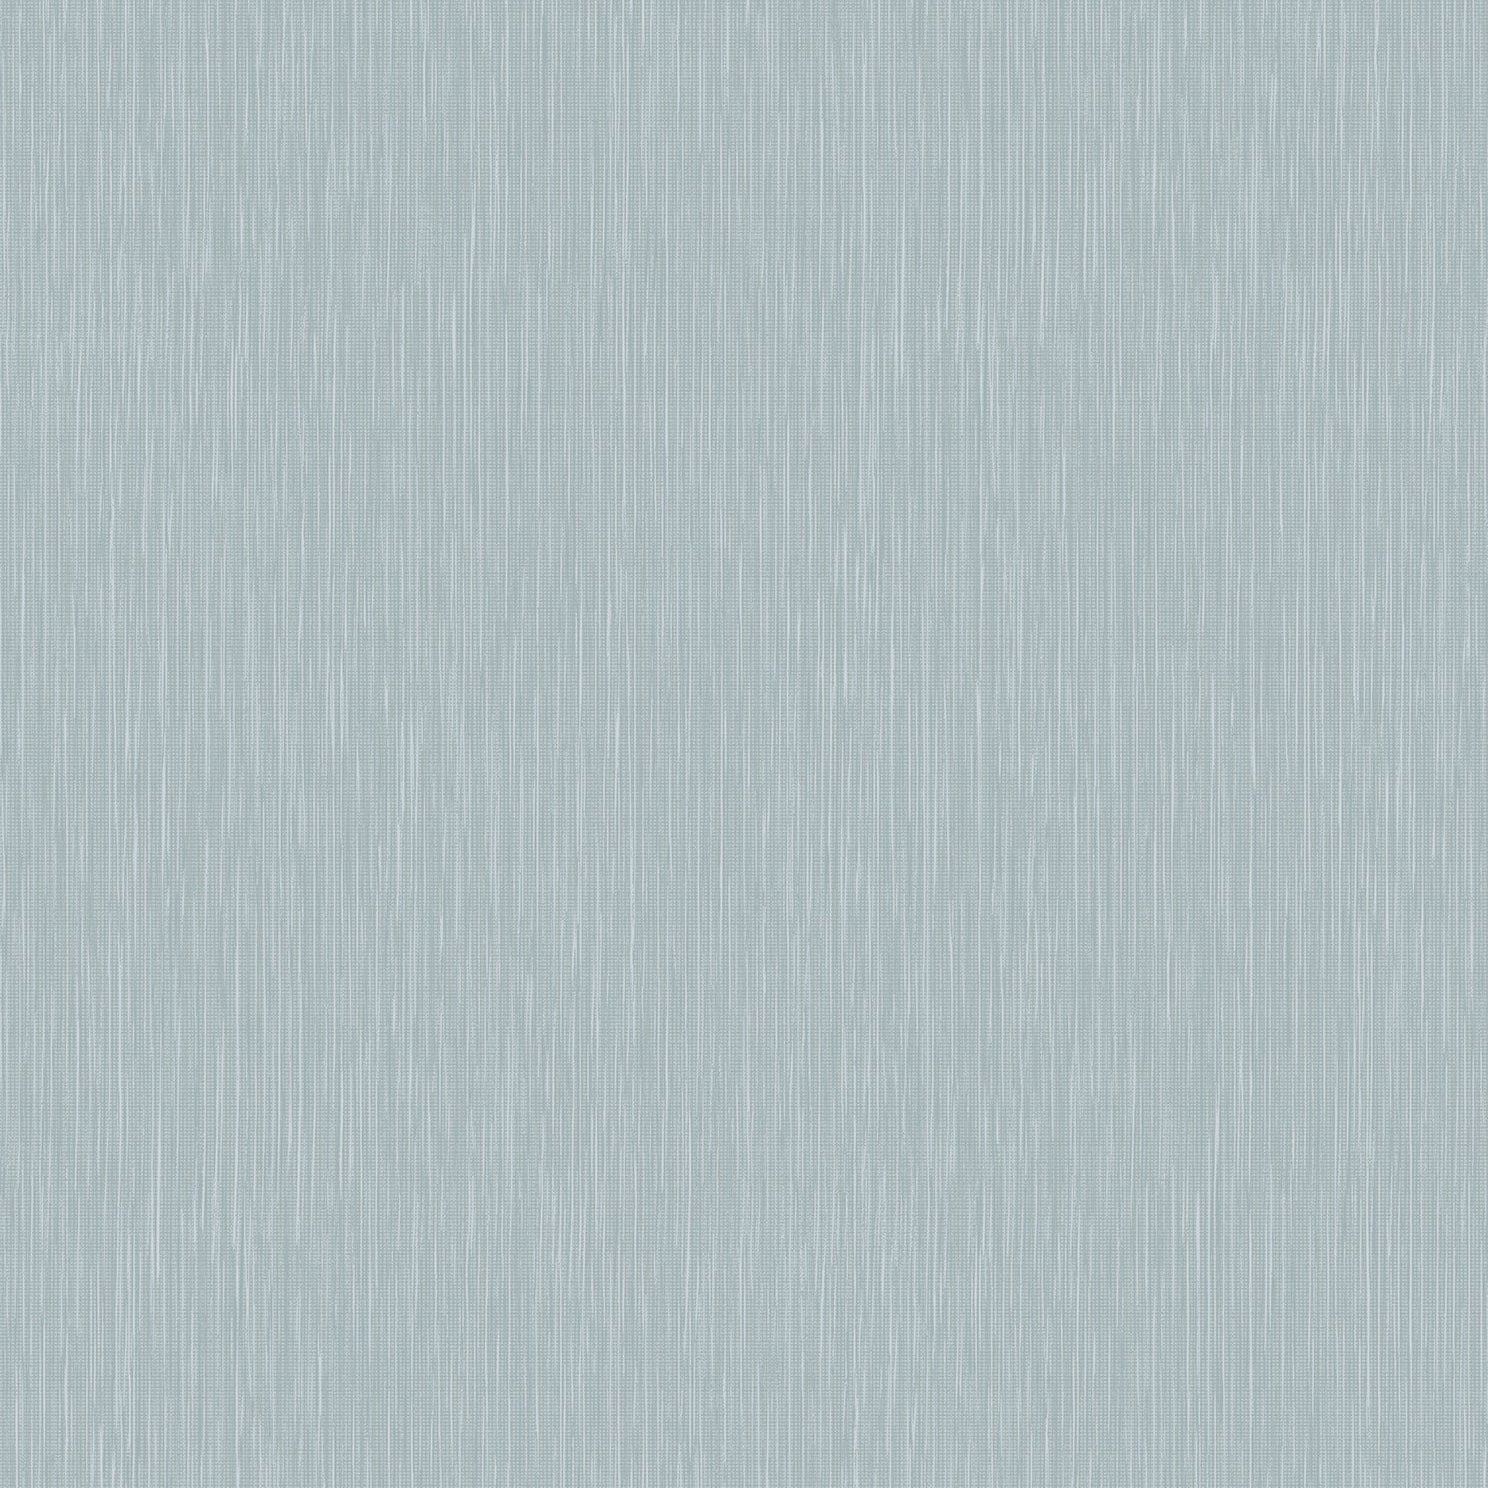 Buy 2959-AWMKE-3202 Textural Essentials Reese Turquoise Stria Turquoise Brewster Wallpaper